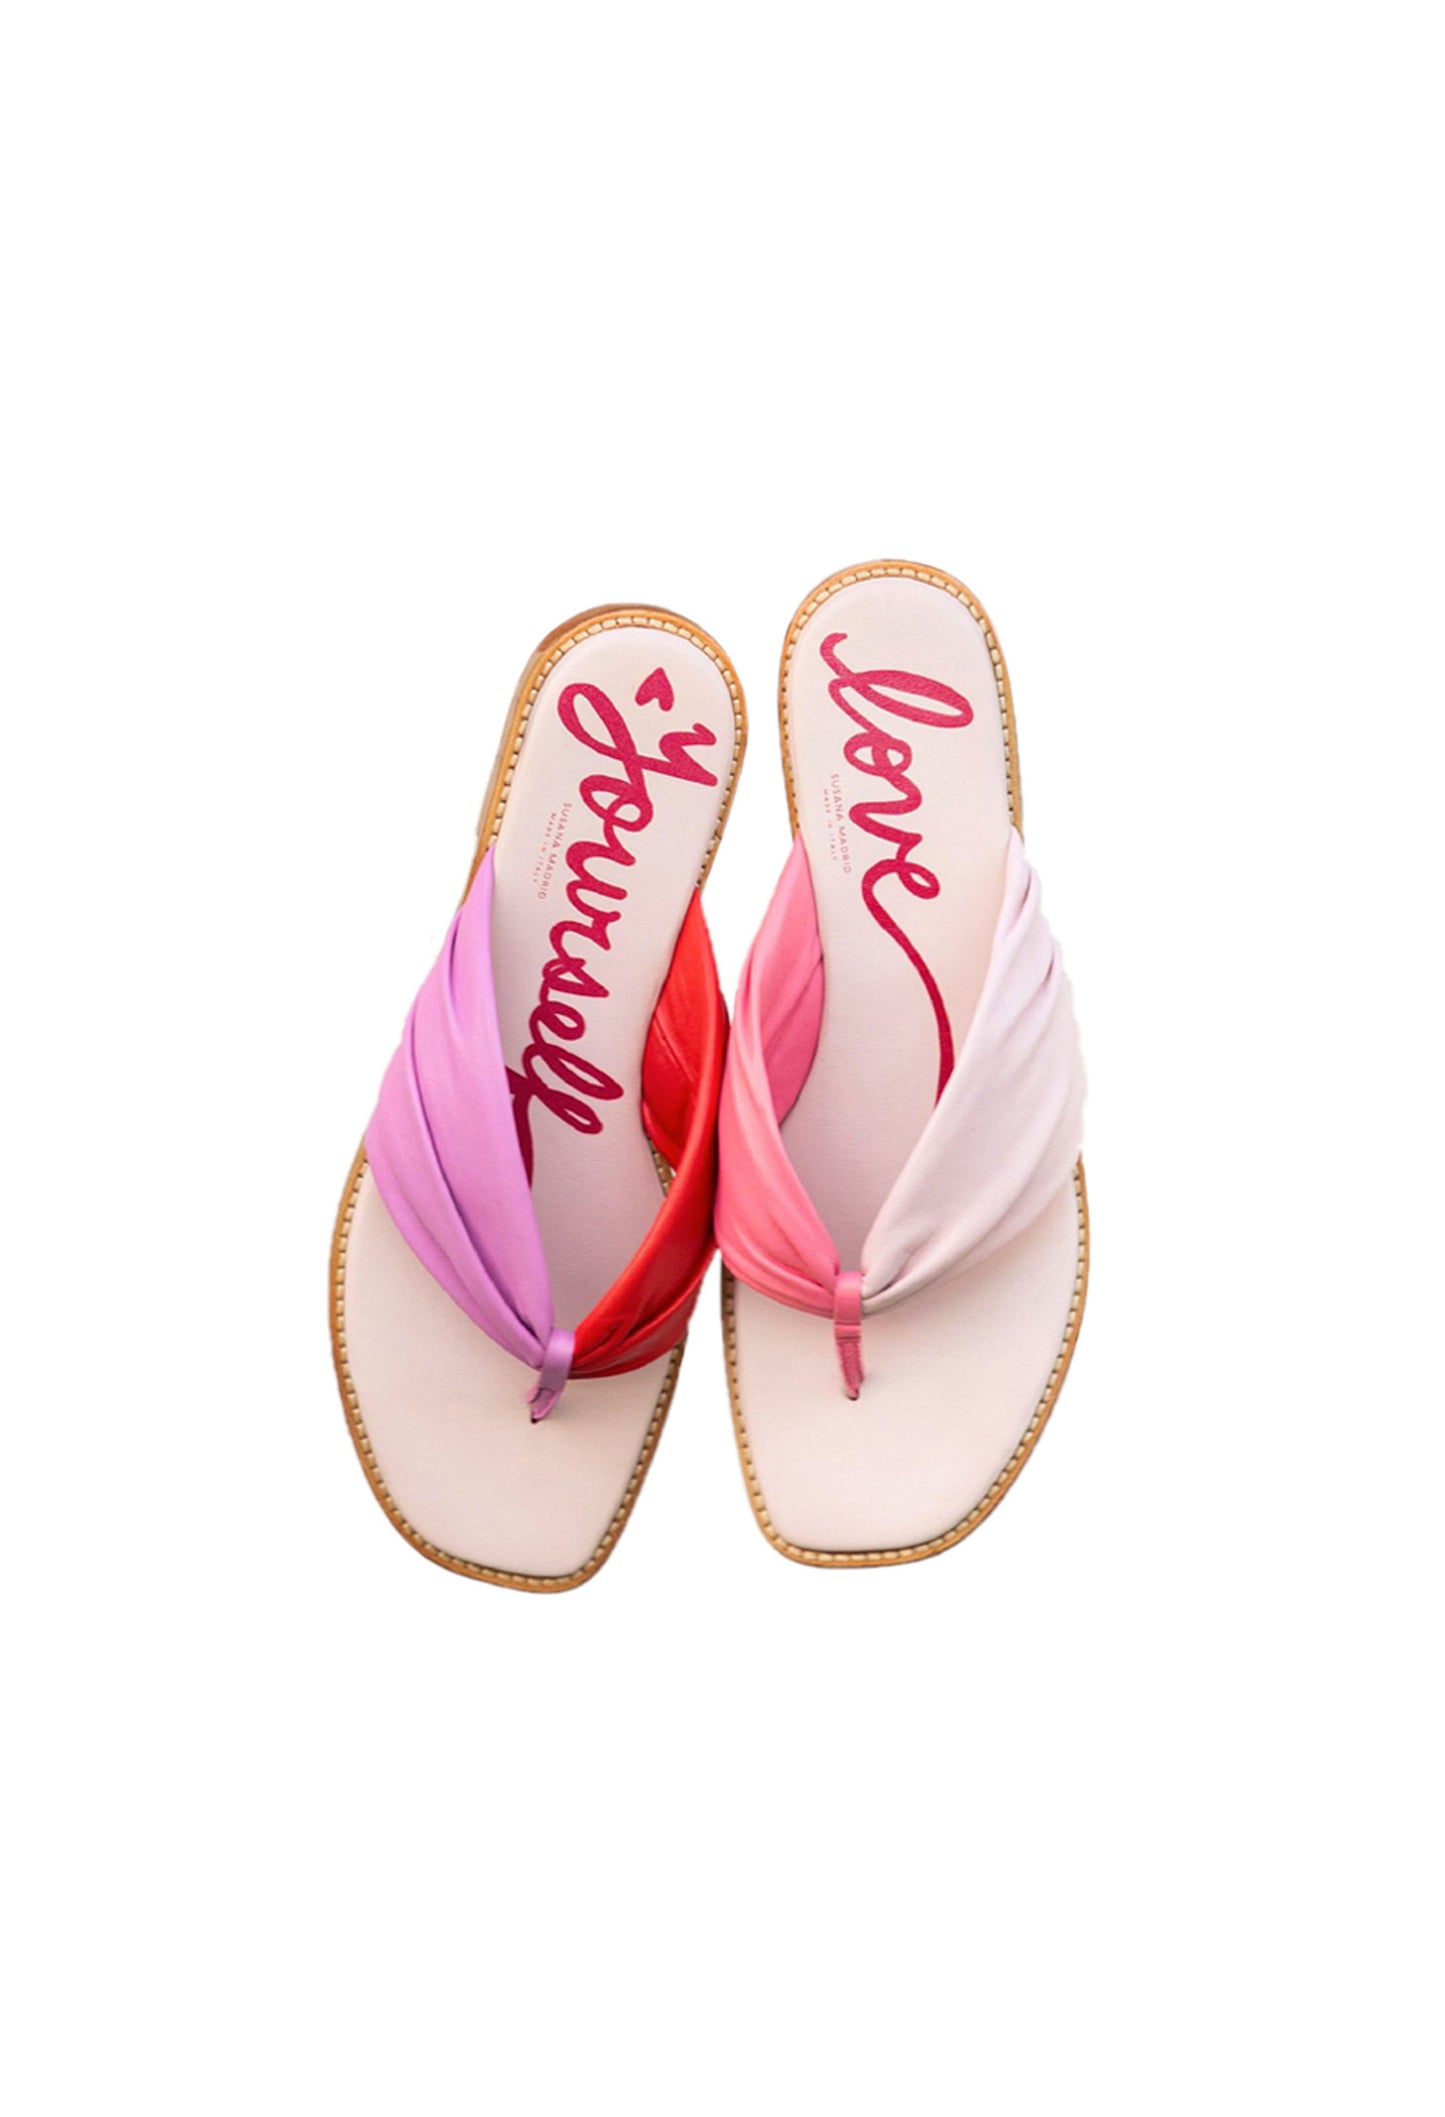 Alma Rosa Flip Flop In Pinks & Reds